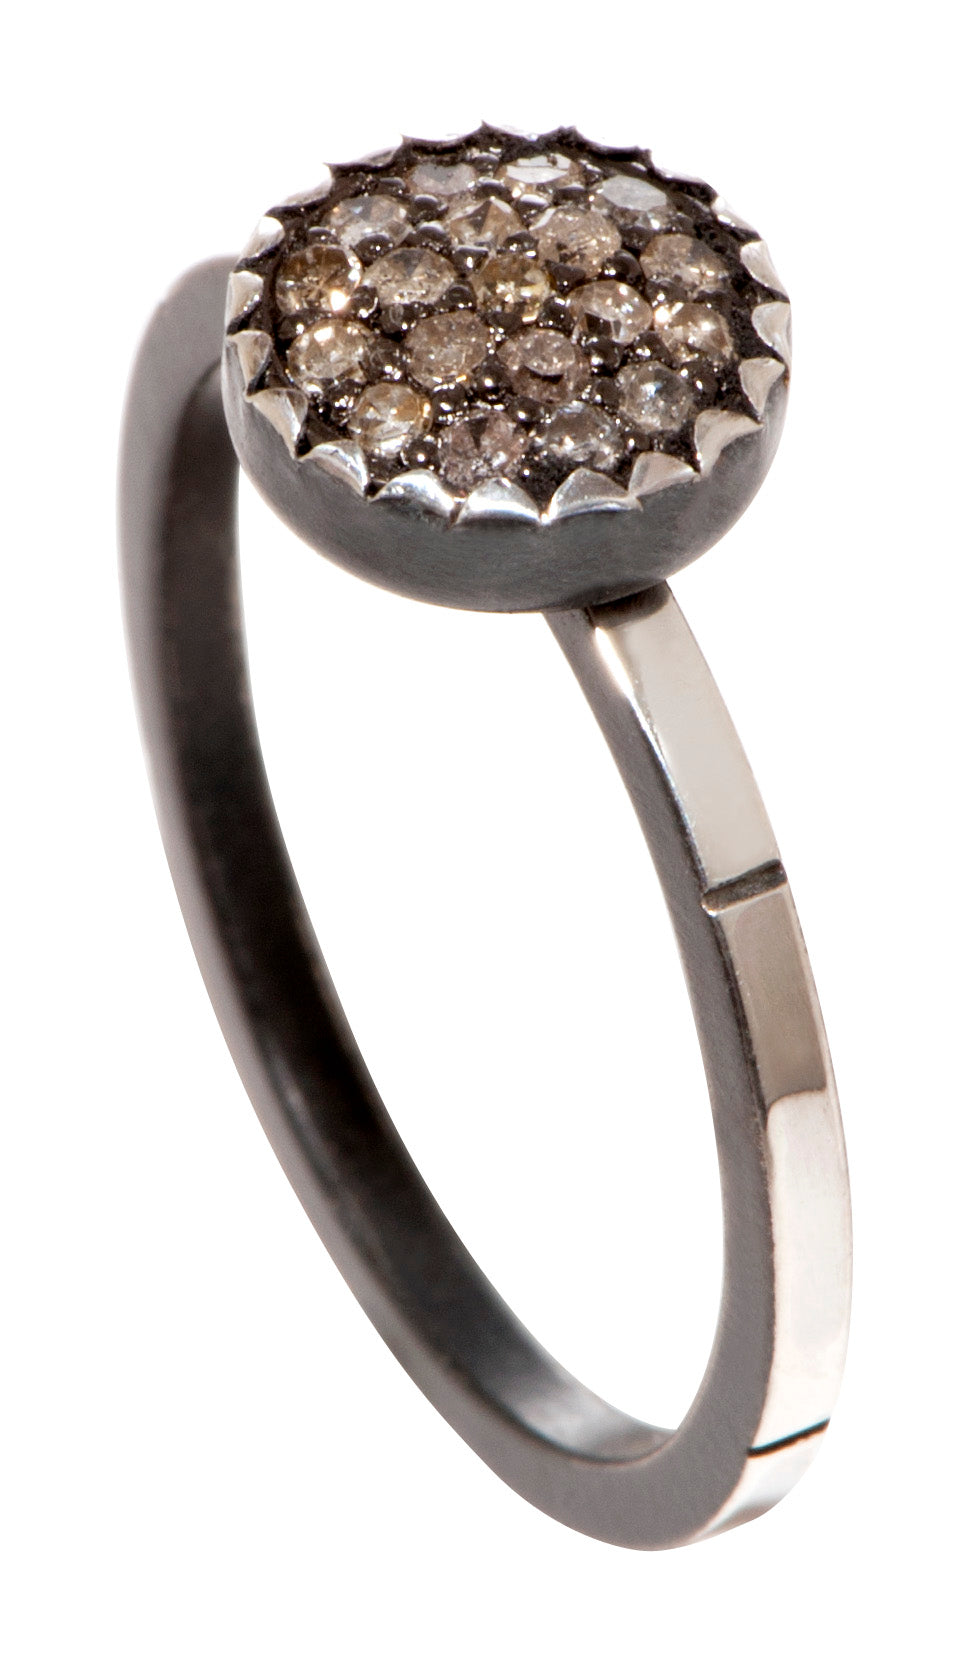 8mm Oxidized Sterling Silver Pave Ring